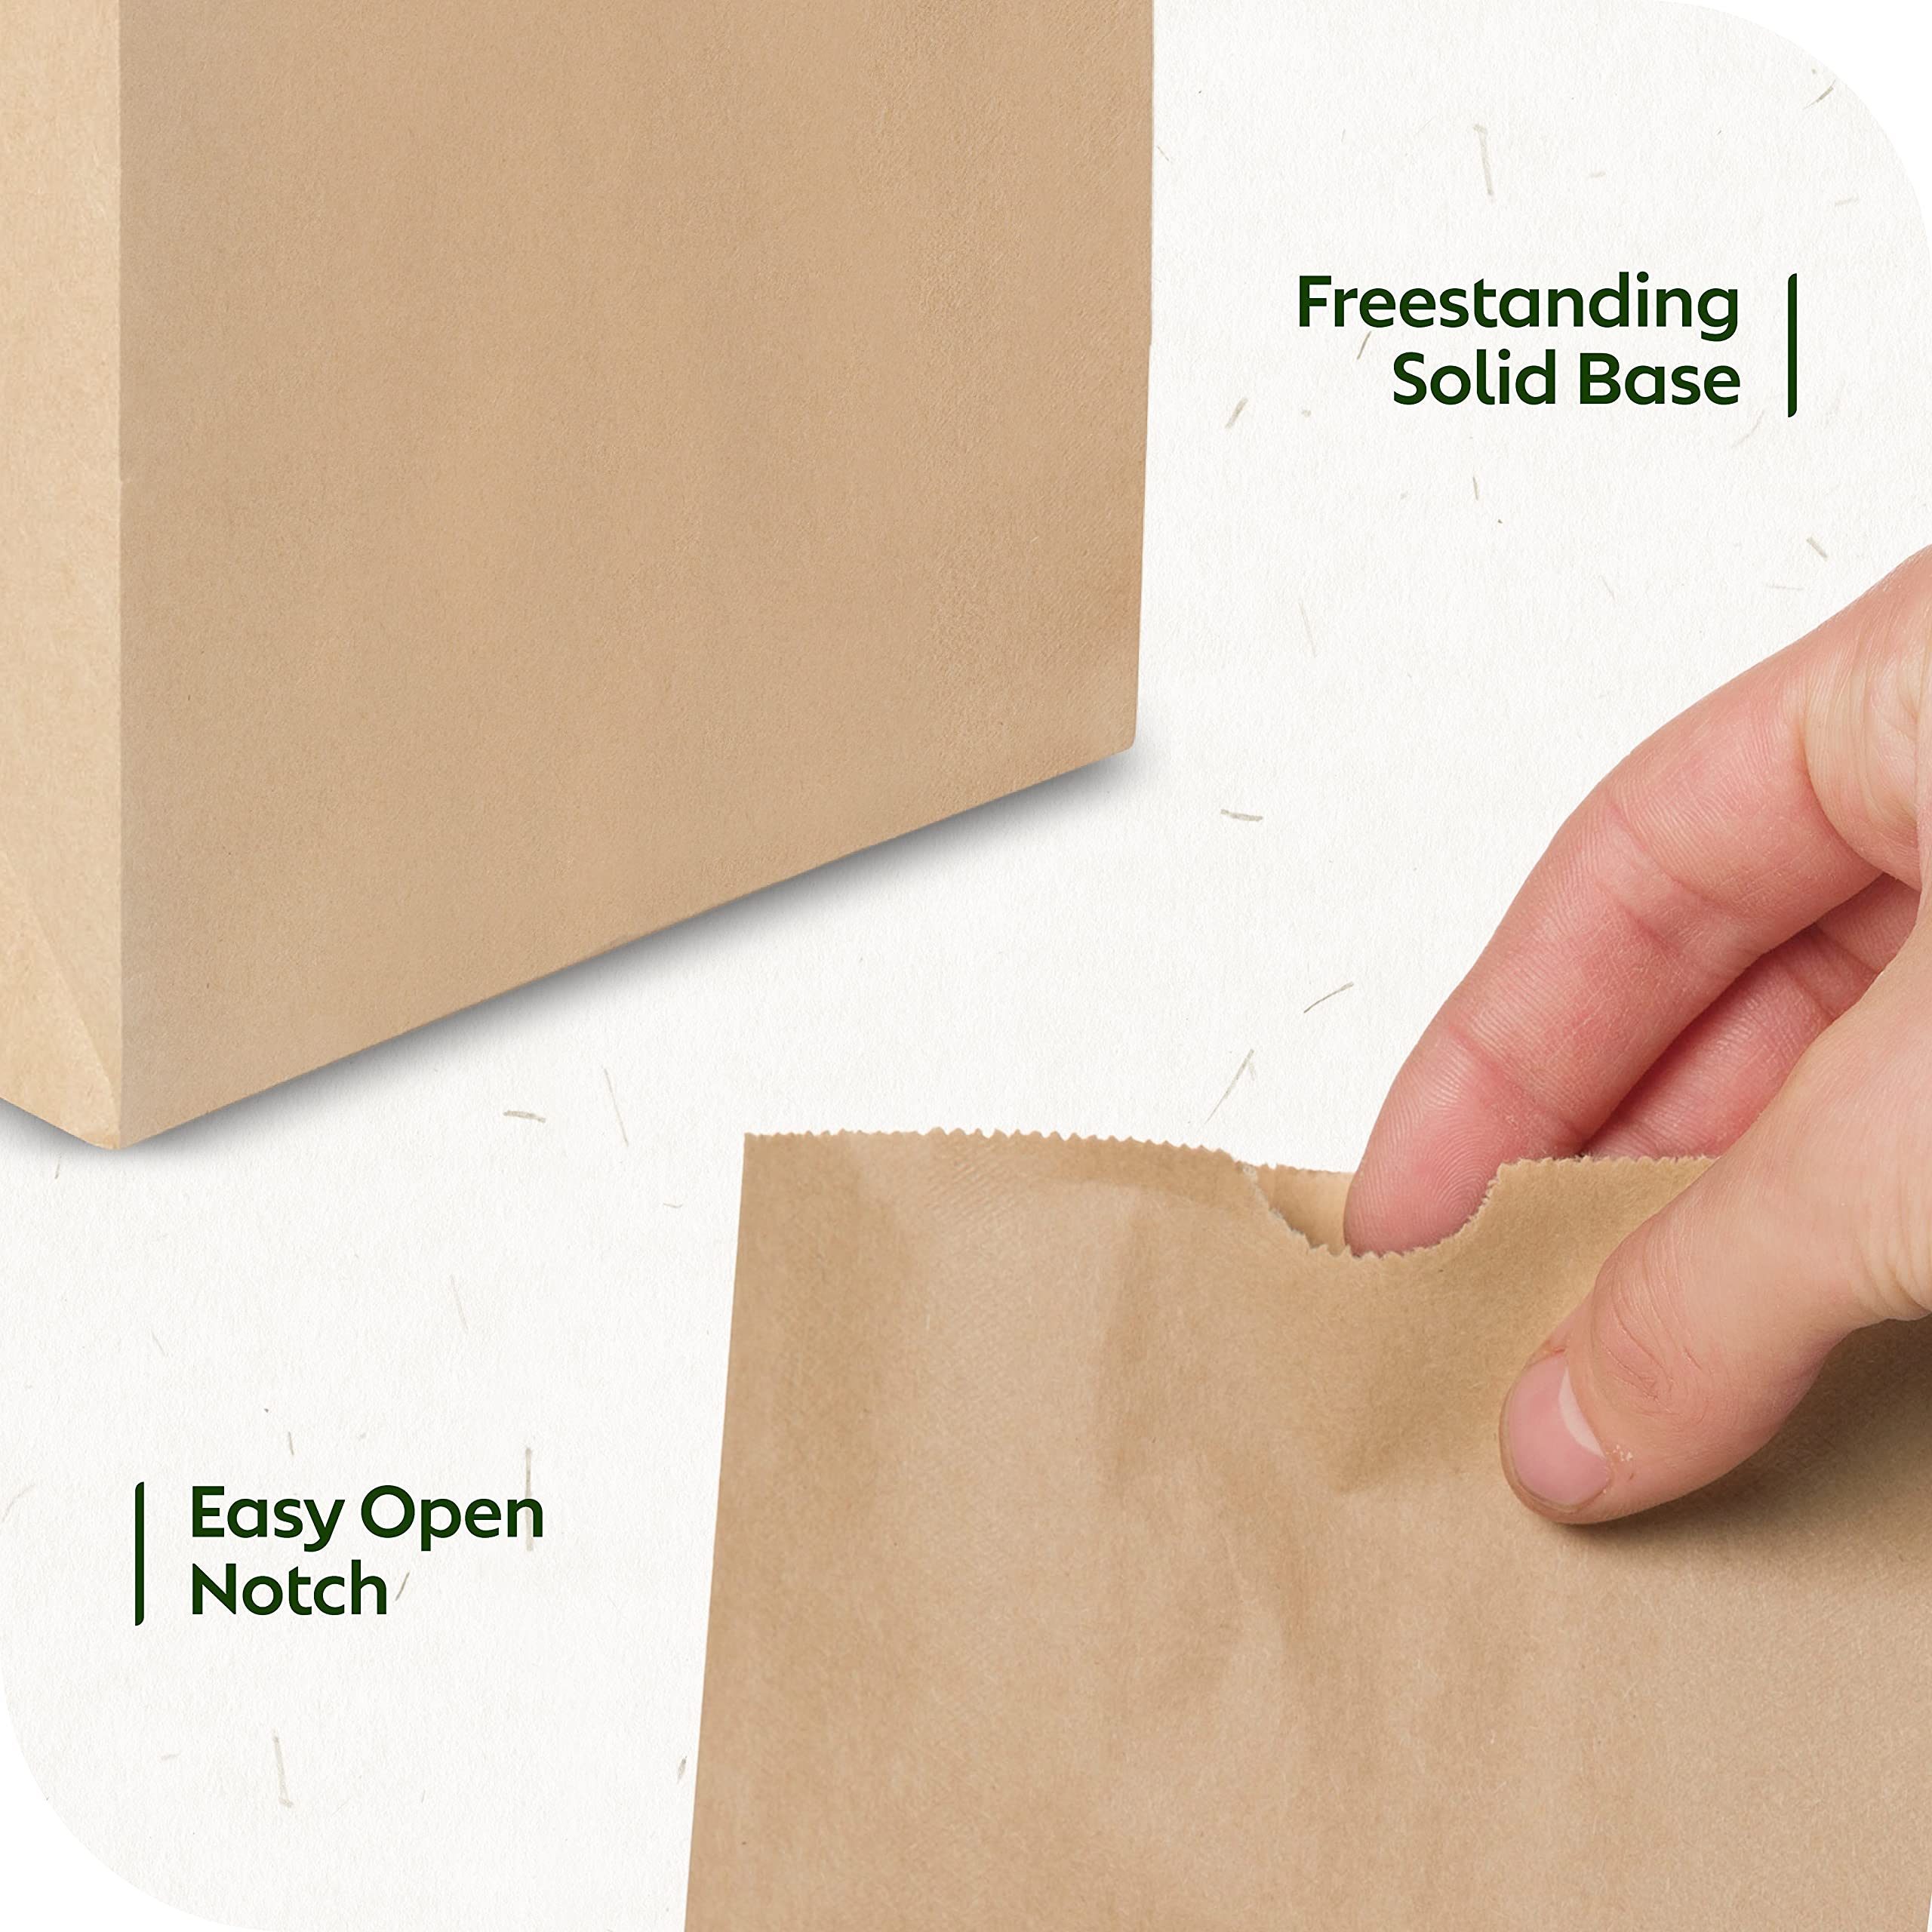 Culinware Kraft Paper Bags 8 Lb - Durable Brown Paper Bags for Snack, Lunch, Sandwich, Pastries, Popcorn, Grocery and Party Favor – Bulk Paper Bags – 6.1 x 4.25 x 12.3 In - 500 Count